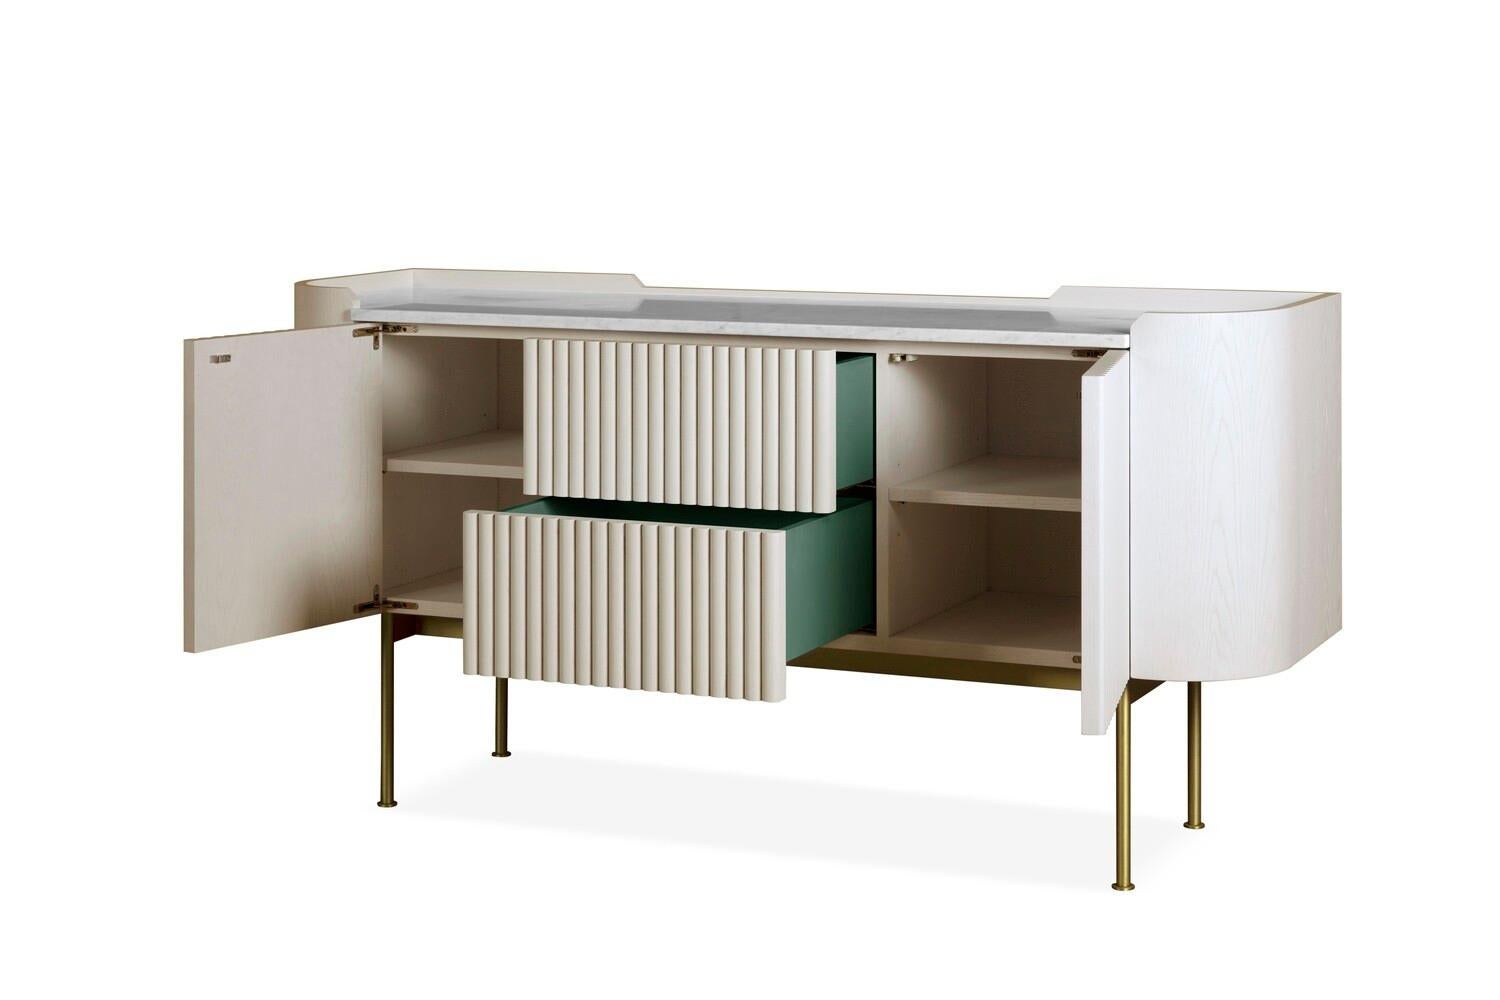 The Stratton sideboard borrows design cues from Art Deco, creating a focal piece for both living and dining room schemes. The clean lines and geometric detailing of the solid oak beaded front exude charm and character. With impeccable attention to